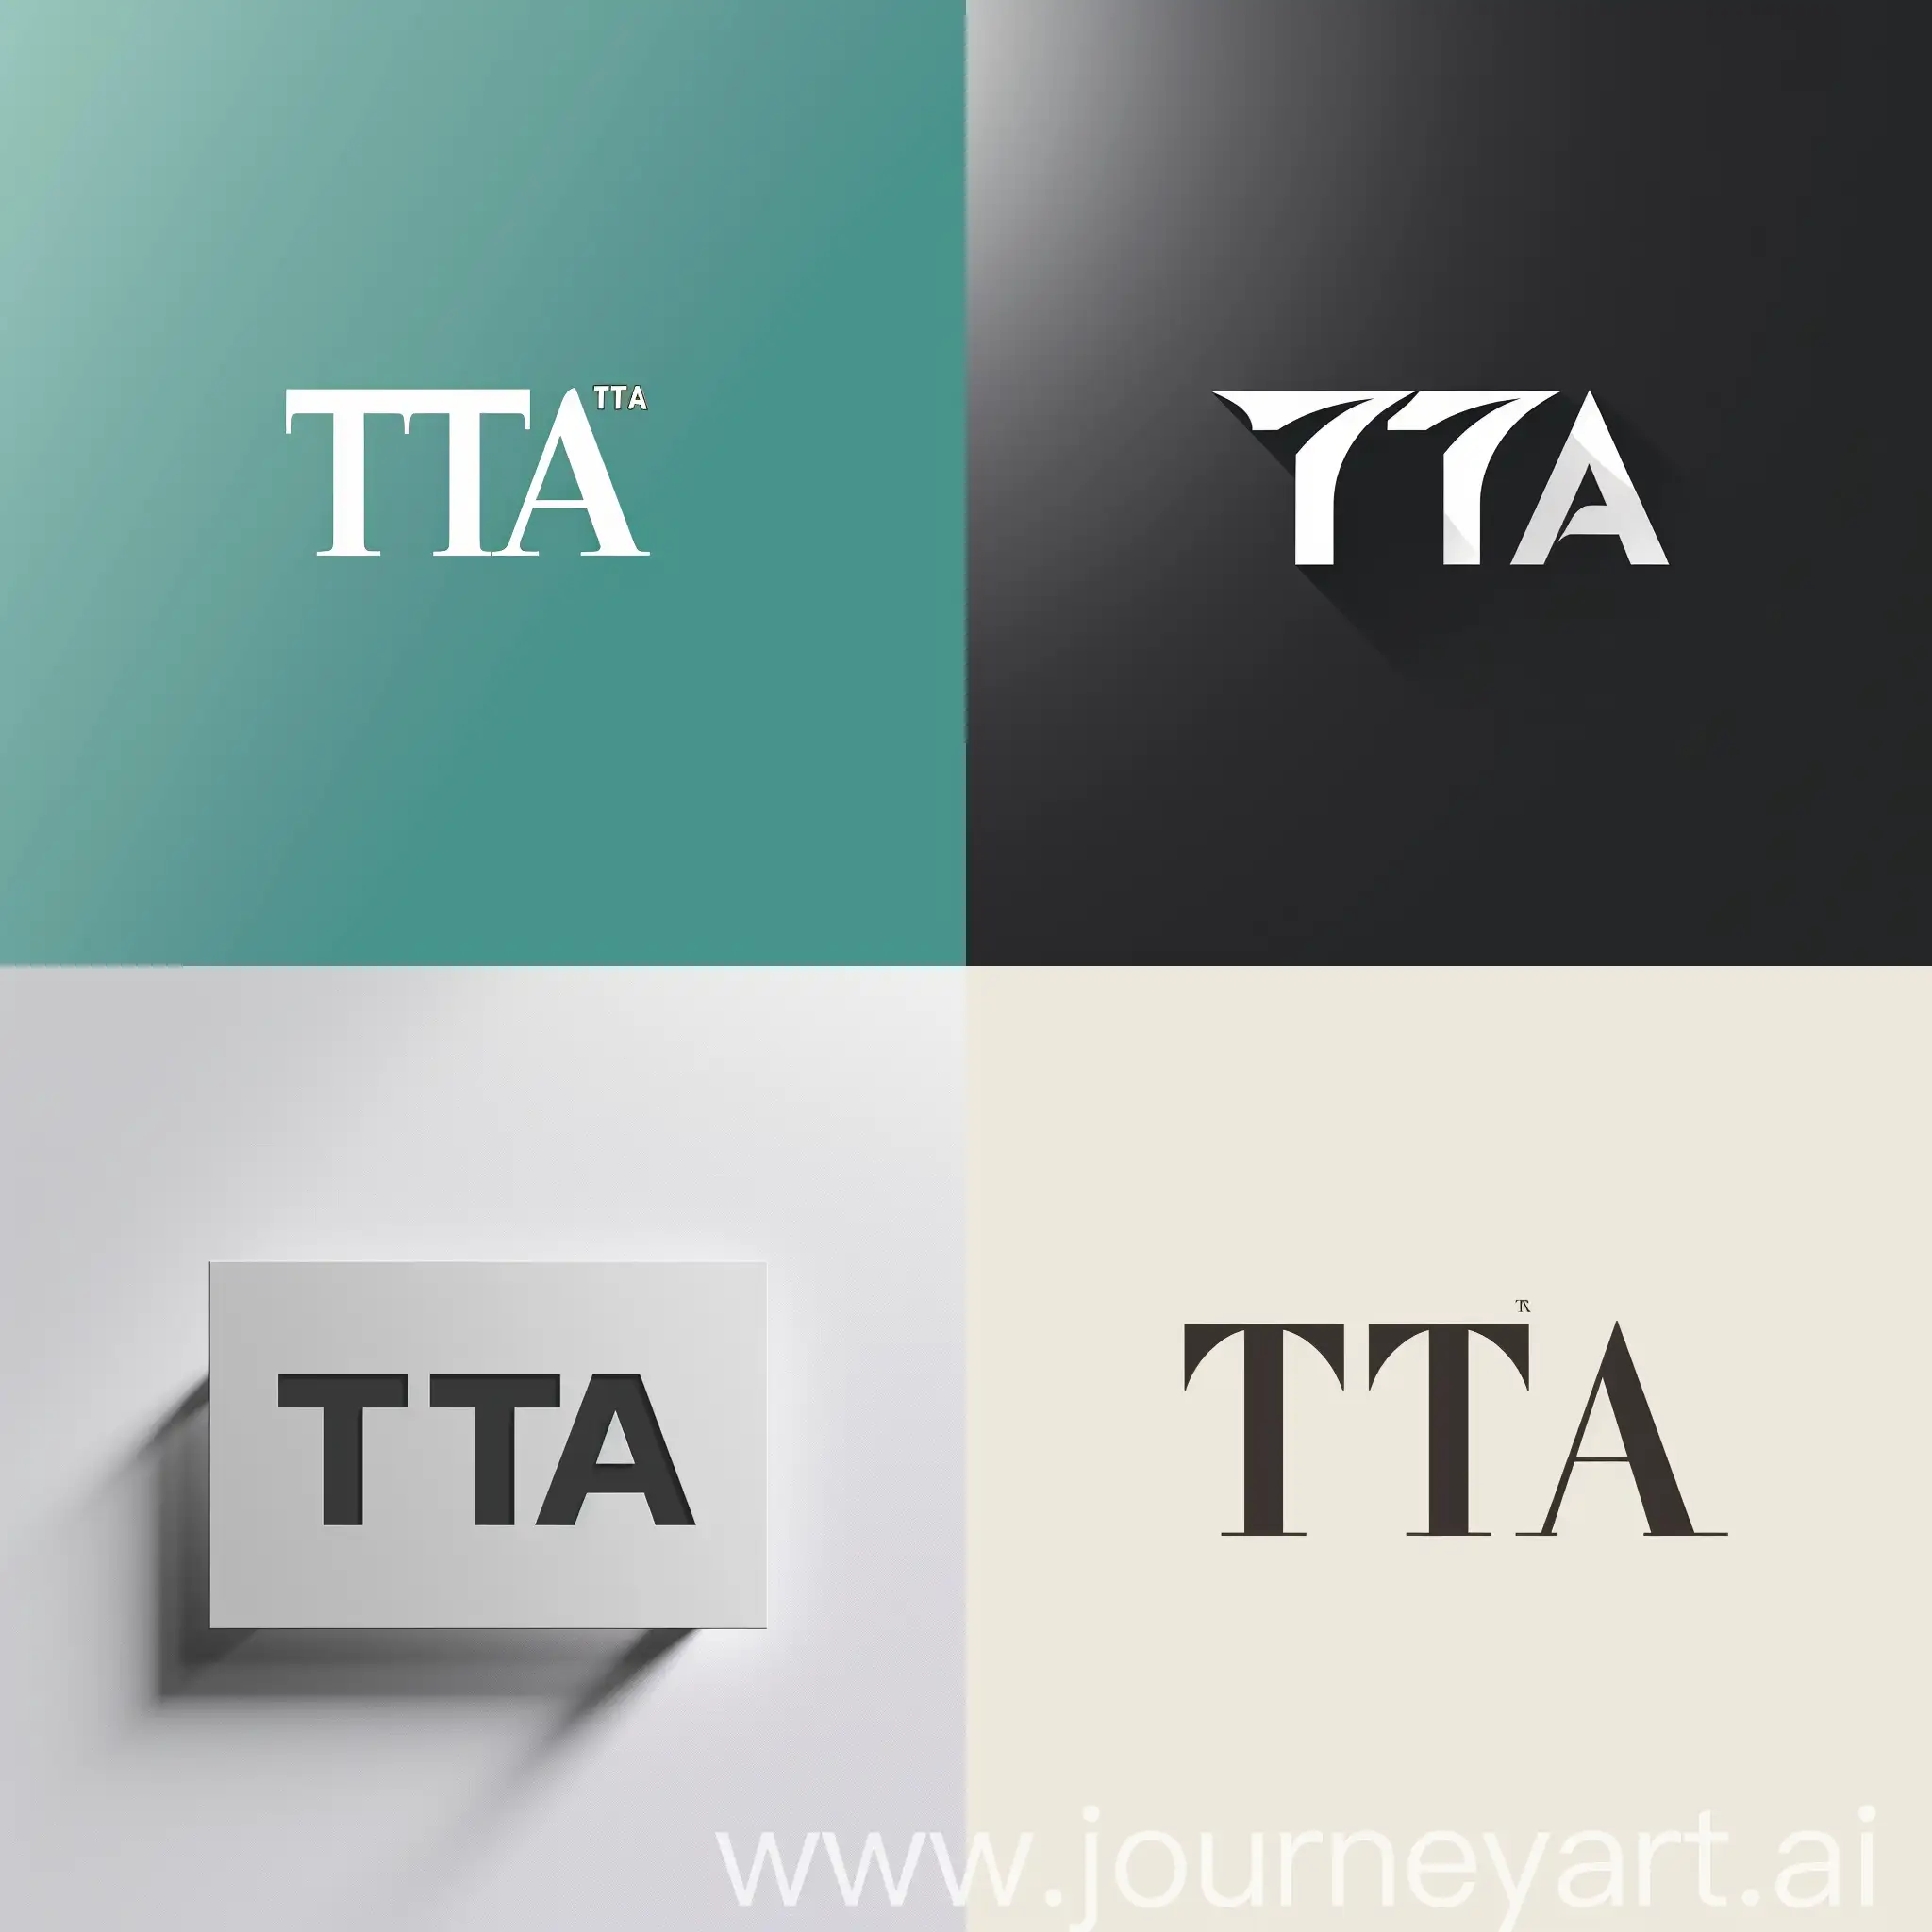 "Create a sleek and professional logo for our cutting-edge tax return company using the initials 'TTA.' The logo should embody trust, efficiency, and expertise while maintaining a minimalist design aesthetic. Ensure that it seamlessly integrates the letters 'TTA' in a creative yet sophisticated manner. The final design should be versatile and impactful, suitable for various marketing materials, with the logo displayed prominently on a plain background."